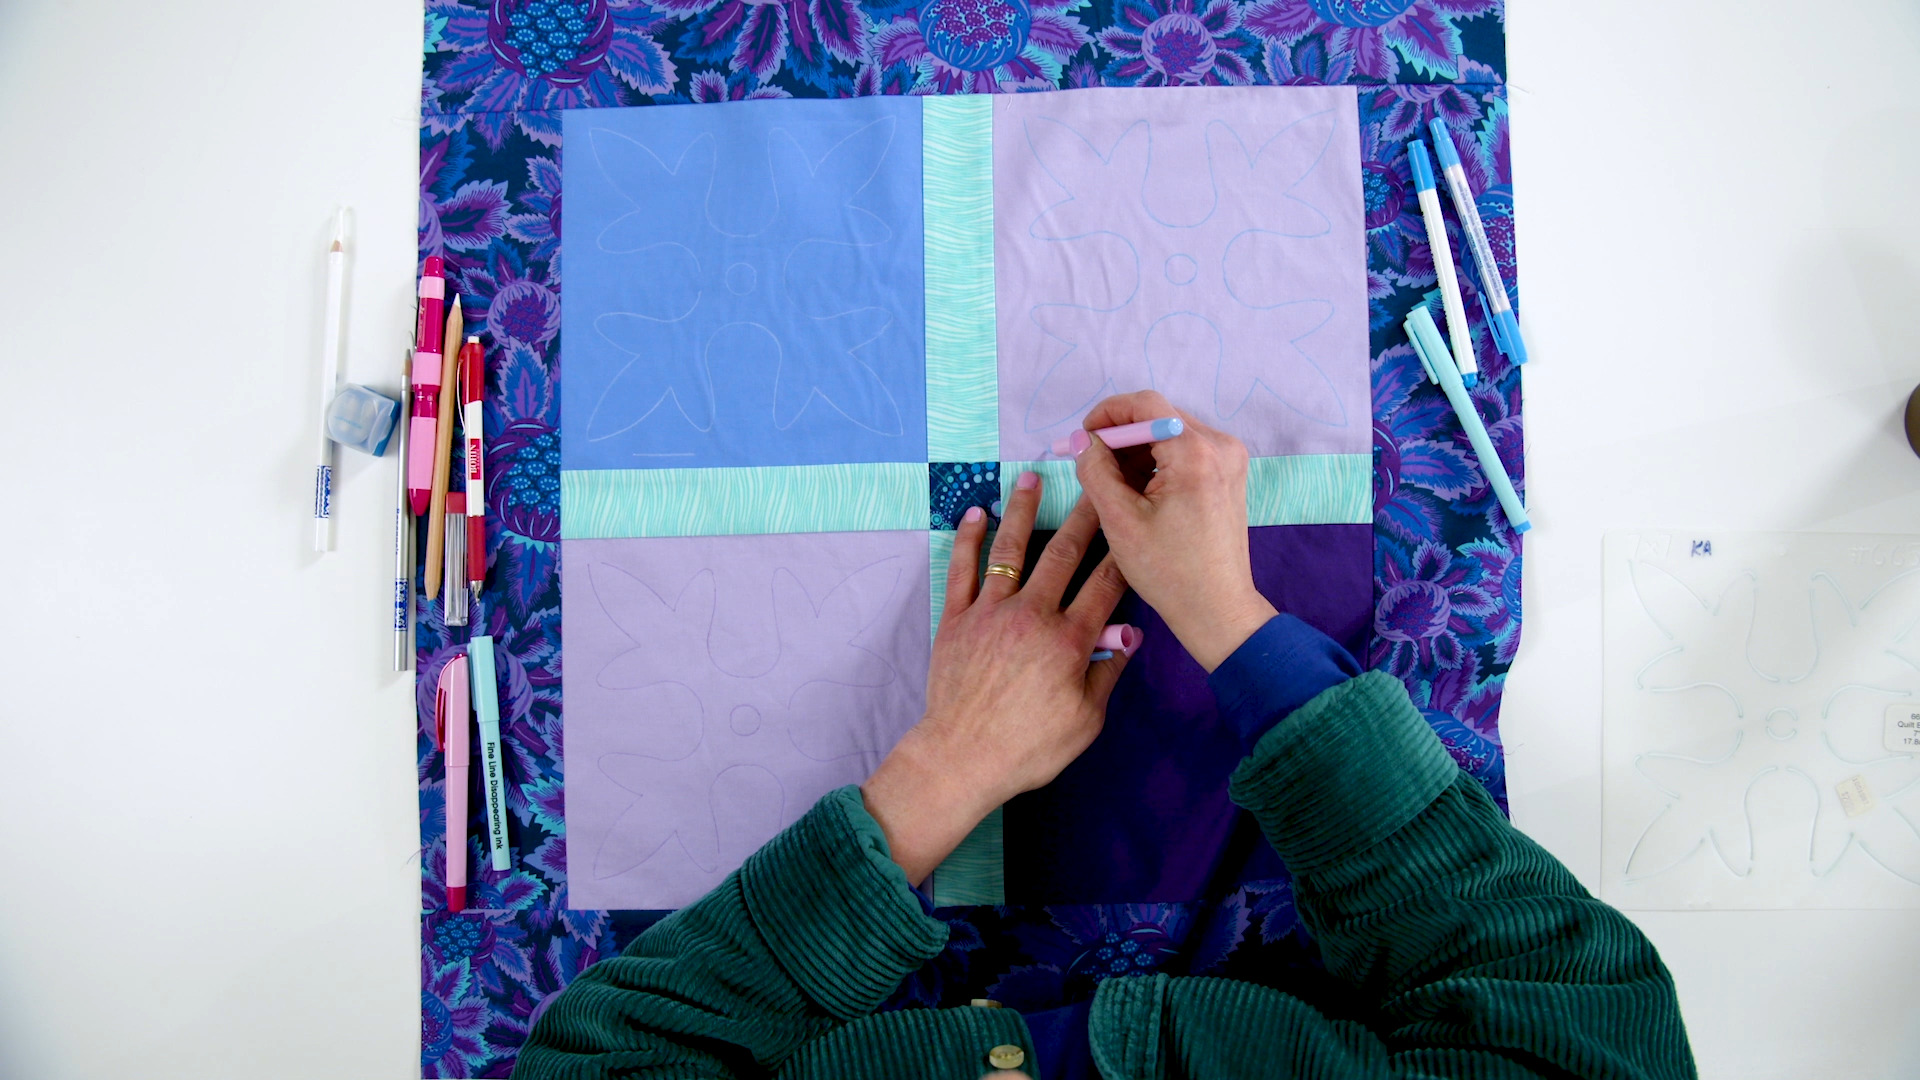 4 Methods for Marking Quilts